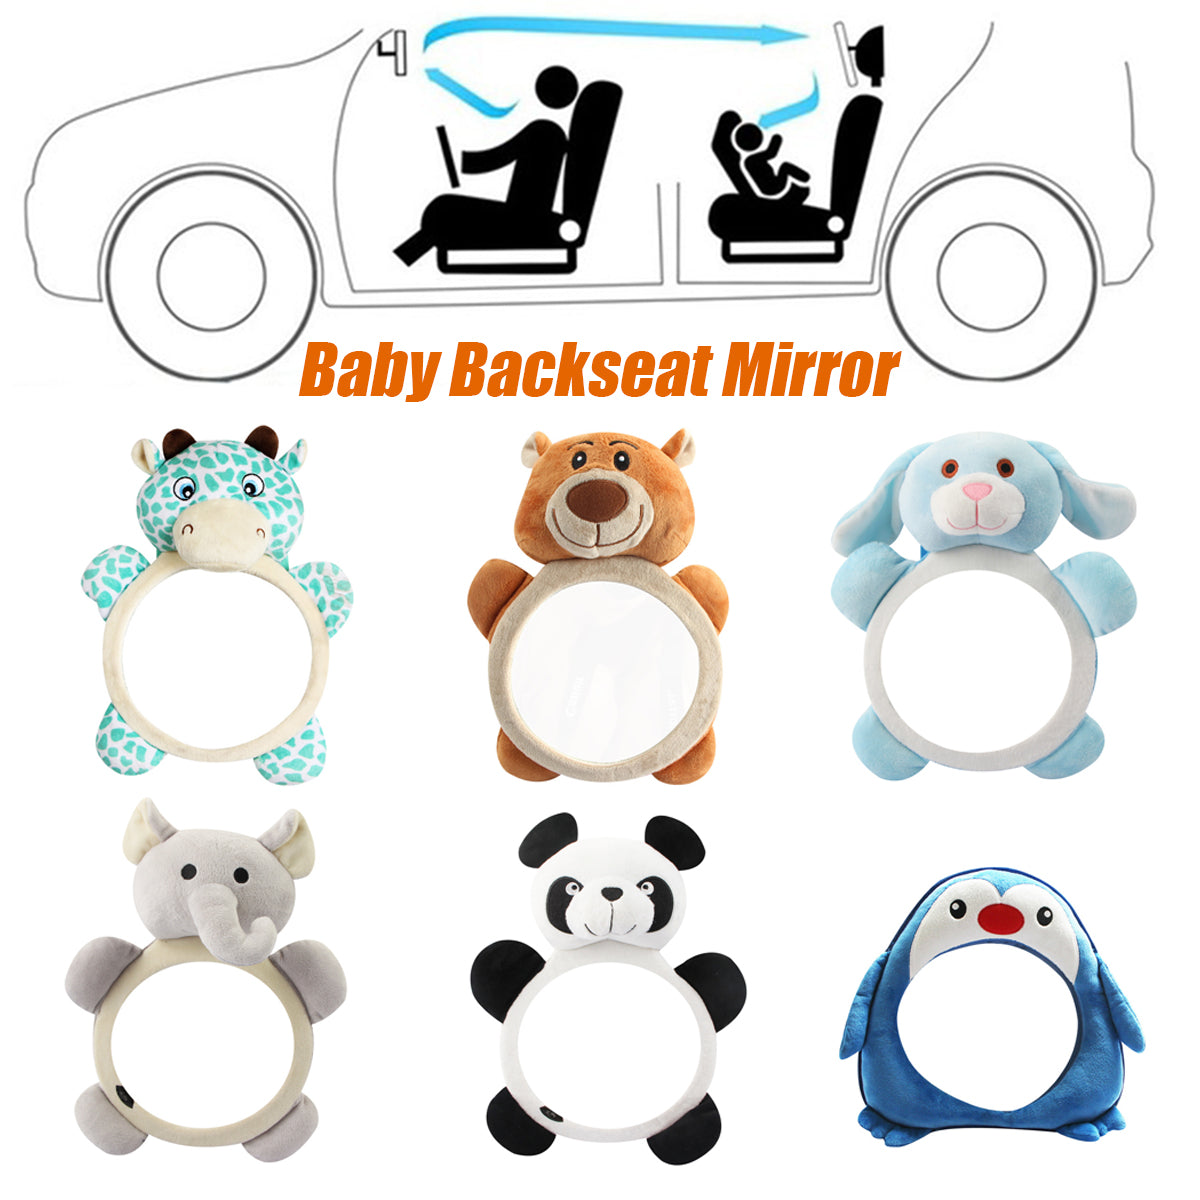 Light Salmon Baby Backseat Mirror Safety Seat Rear View Mirror For Car View Infant Rear Facing Newborn Animal